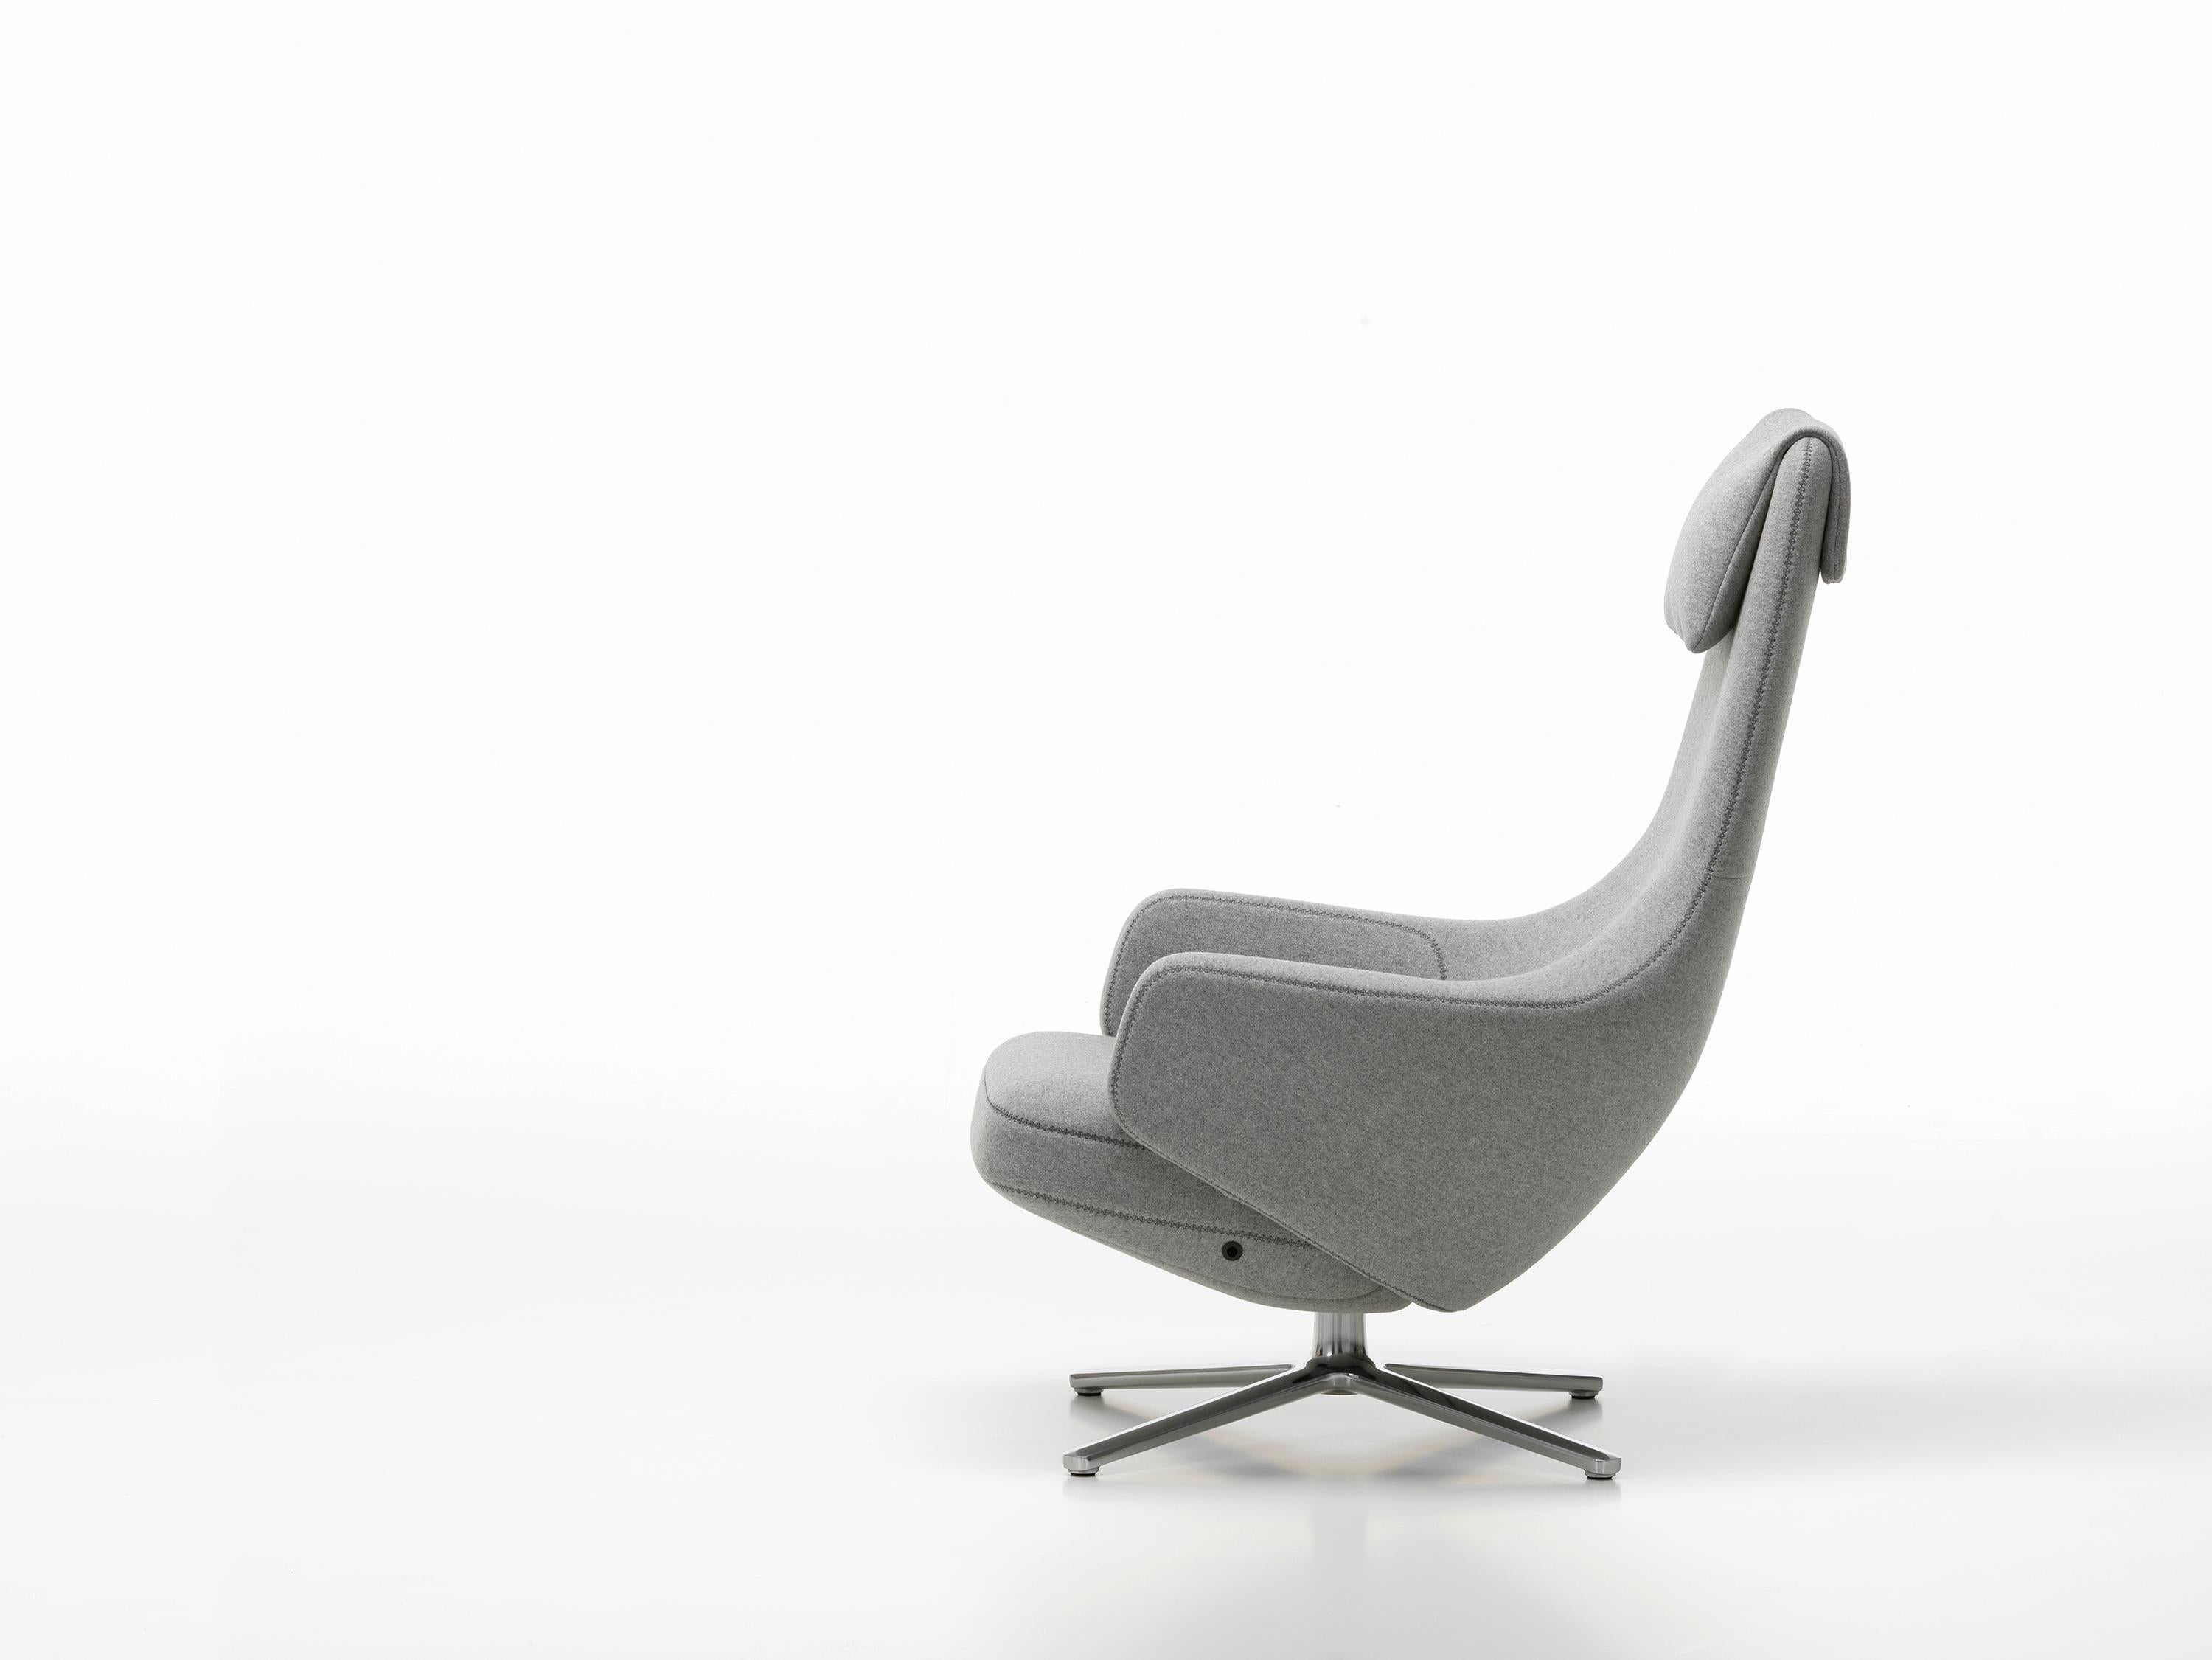 Vitra Repos Lounge Chair in Pebble Grey Cosy by Antonio Citterio For Sale 5